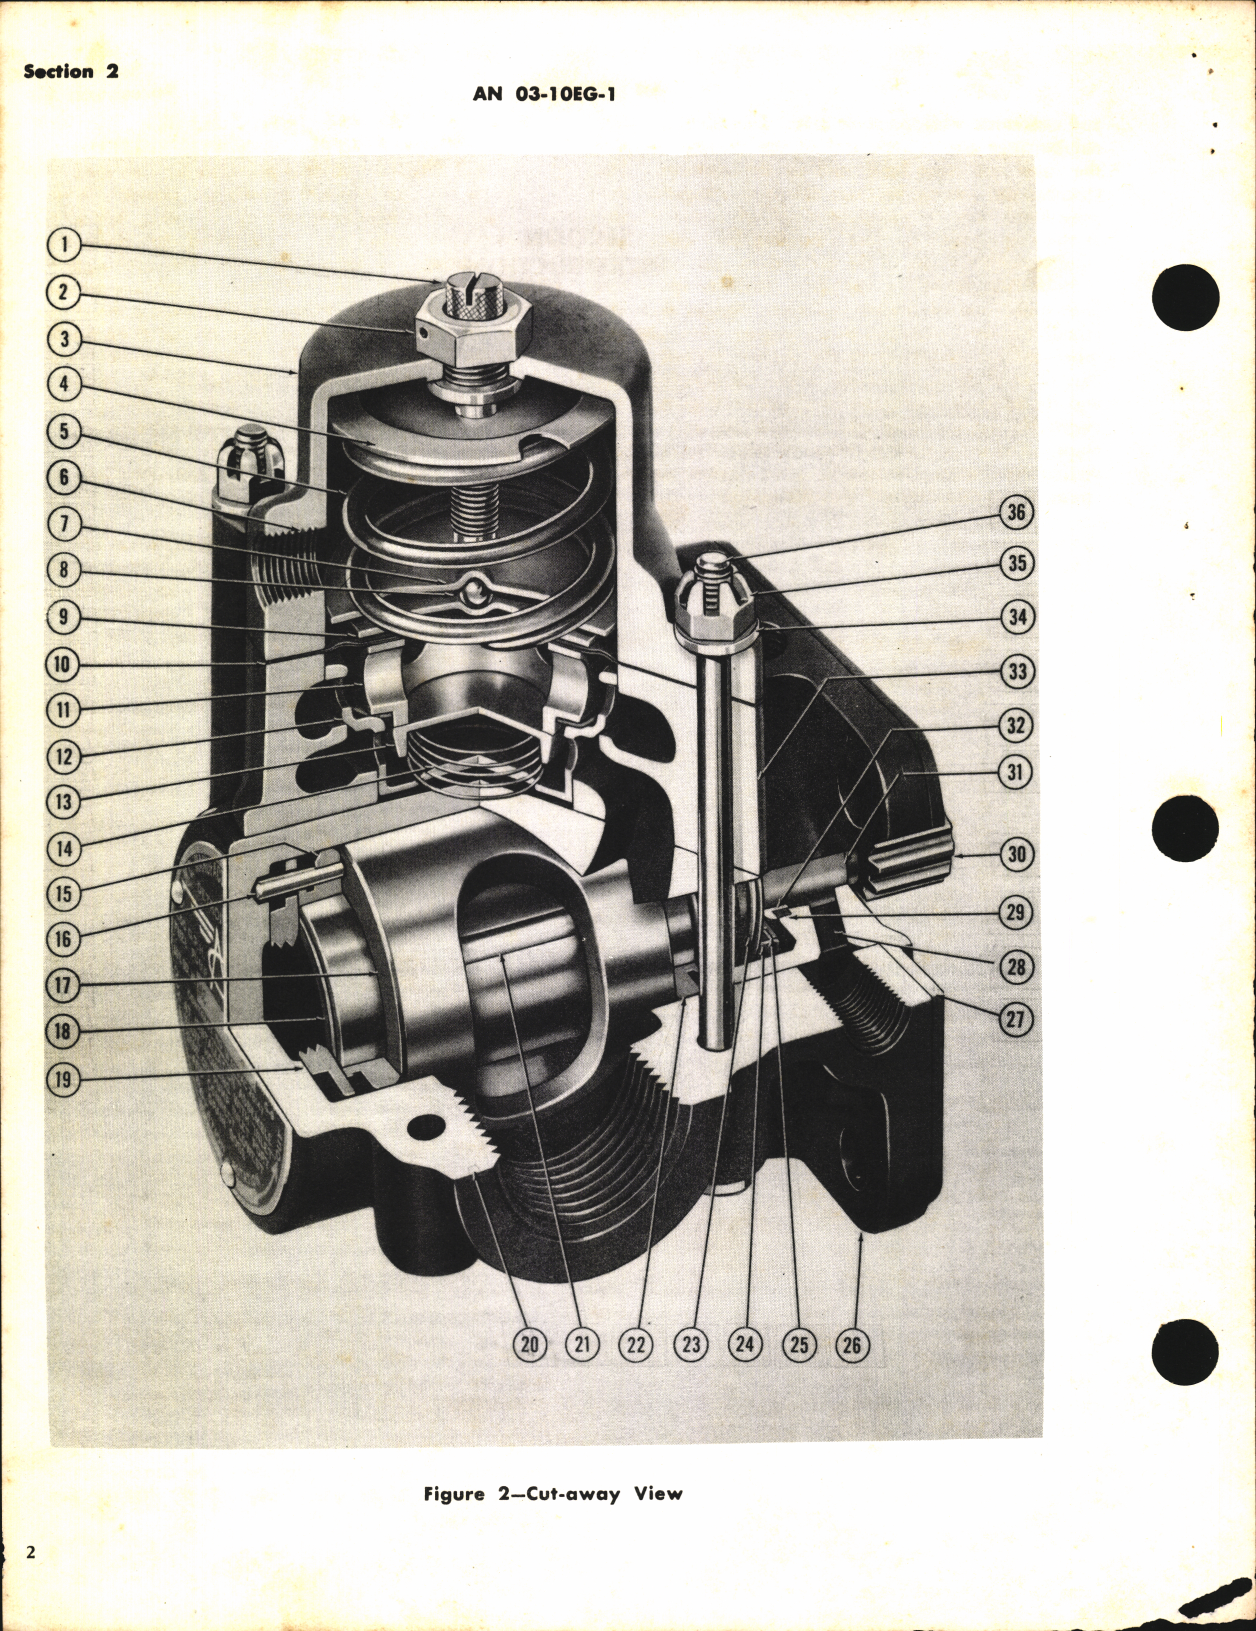 Sample page 6 from AirCorps Library document: Operation, Service, & Overhaul Inst w/ Parts Catalog for Engine-Driven Fuel Pump Type AN4101 (G-9)